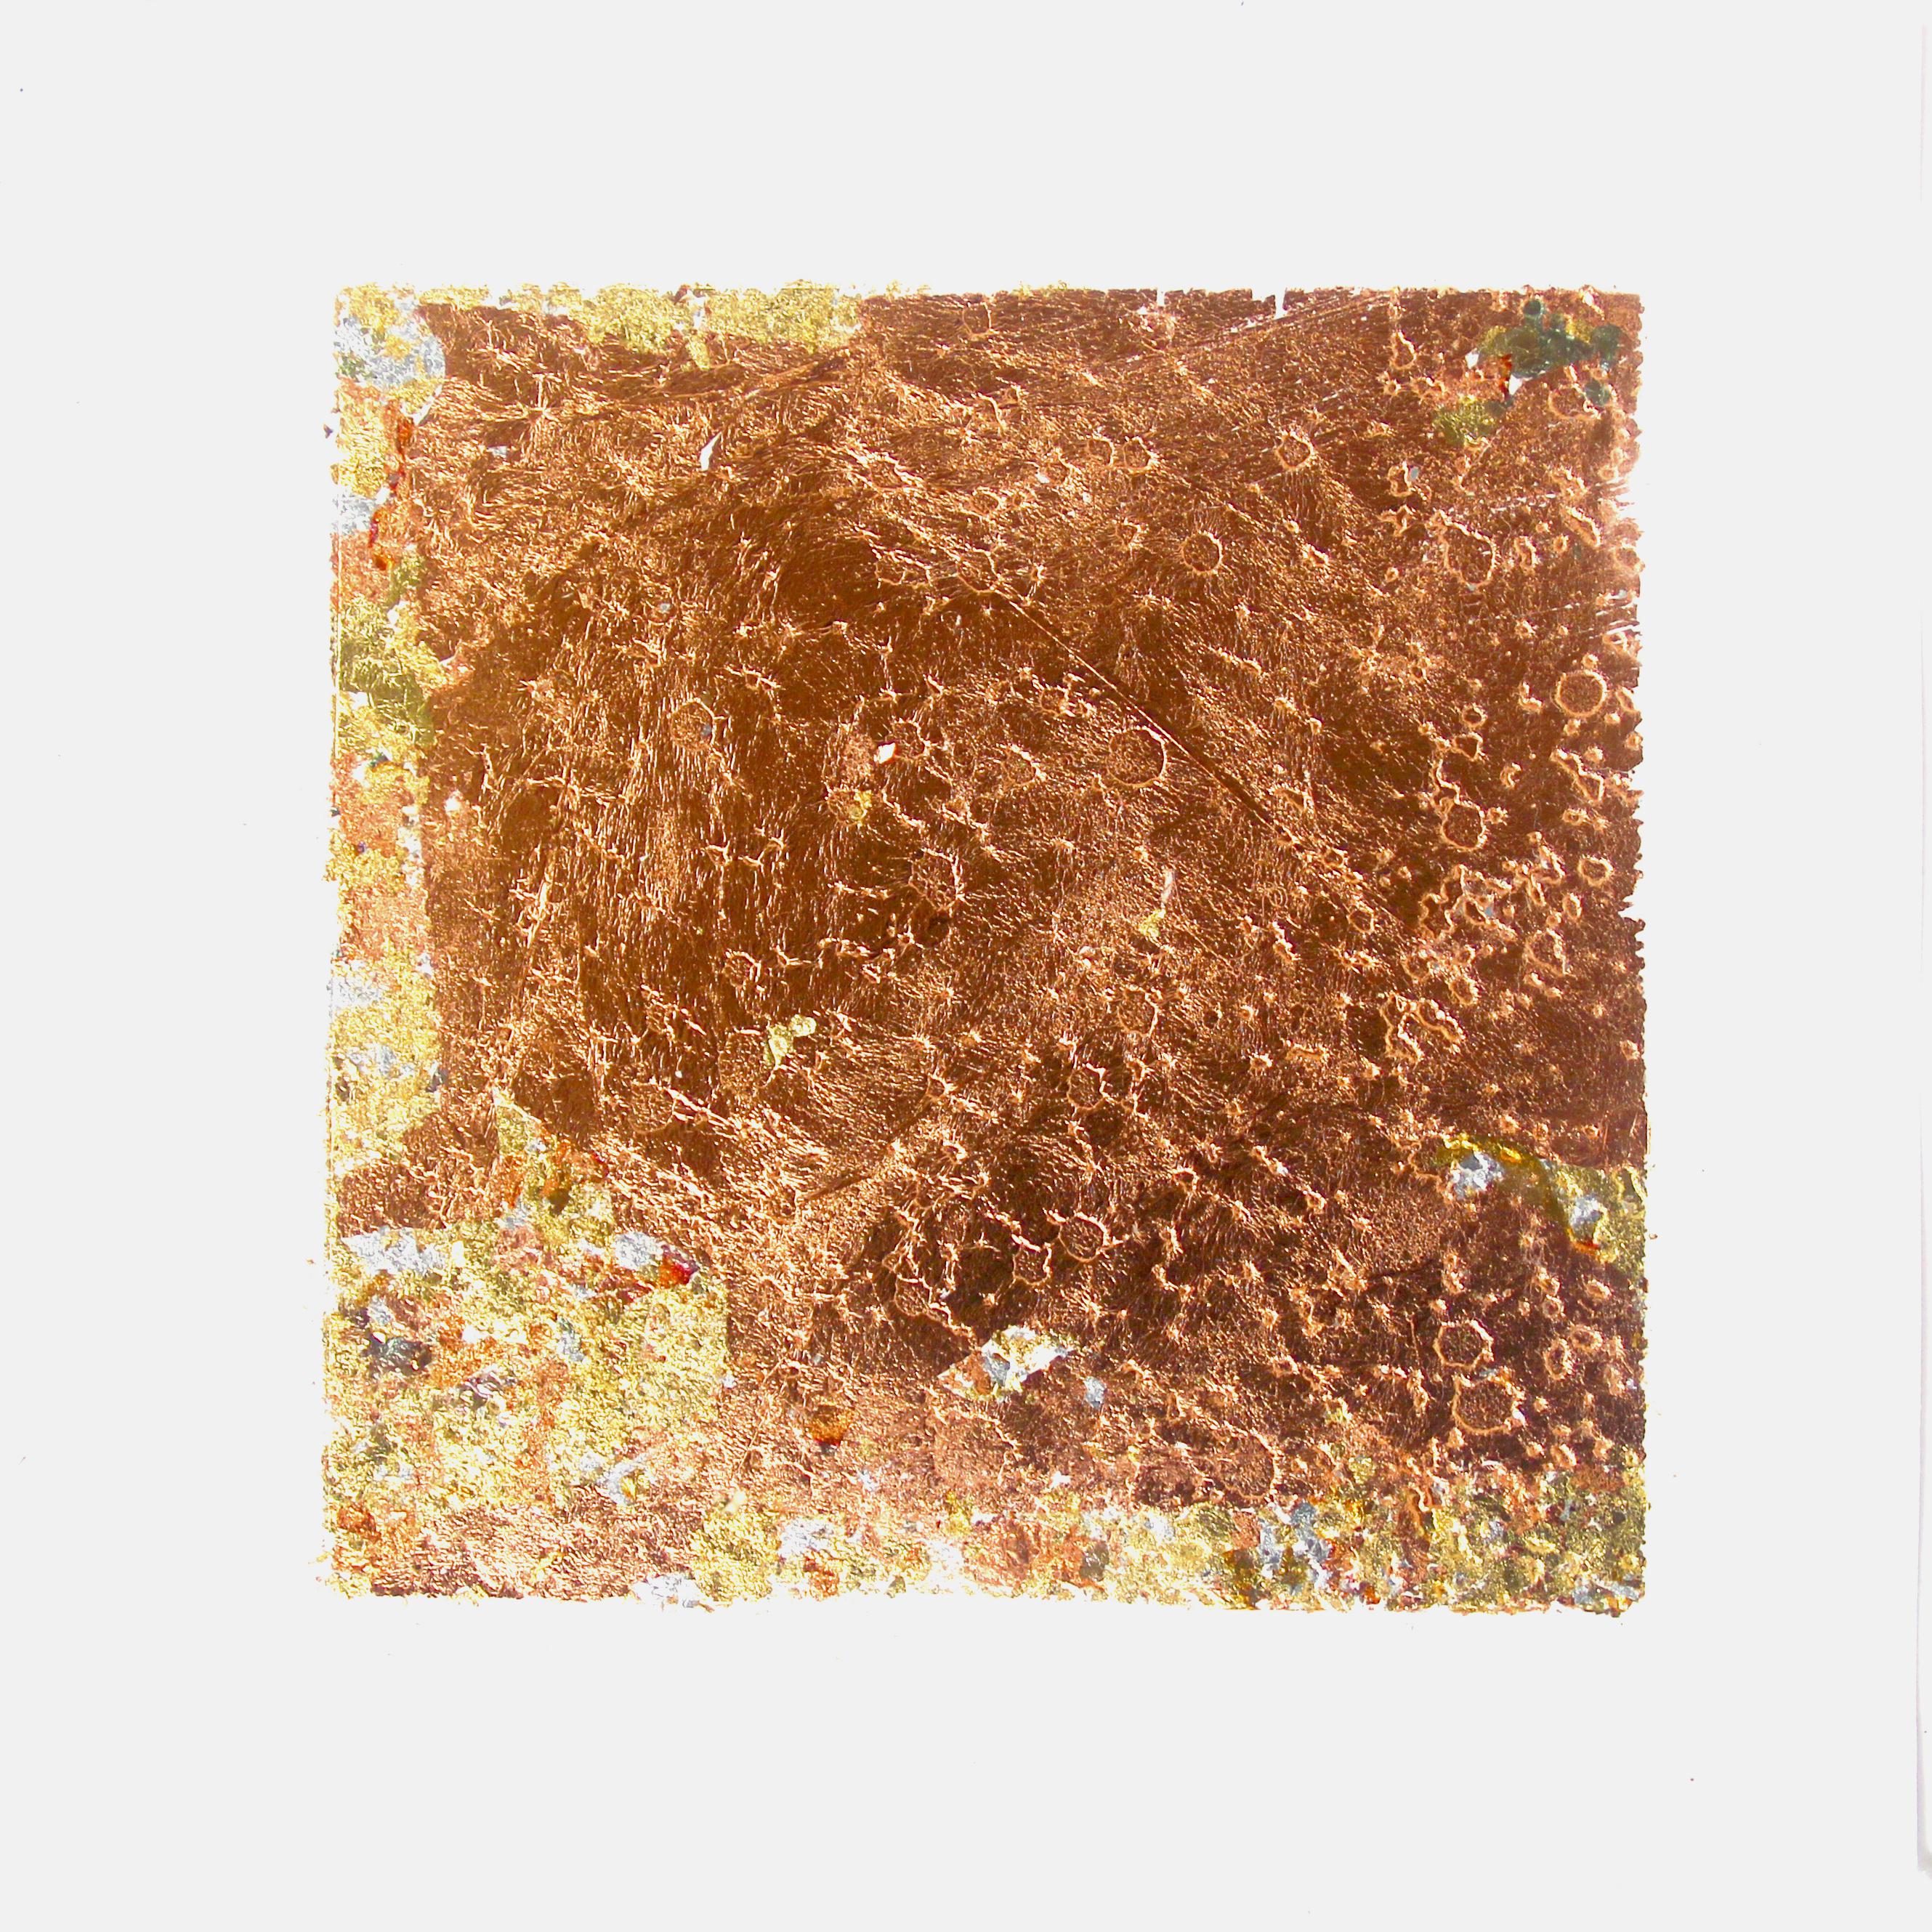 Jayne Wilton Abstract Print - Joy is not made to be a Crumb (Mixed): Bubbles in the Sand, Hand-Pulled Etching